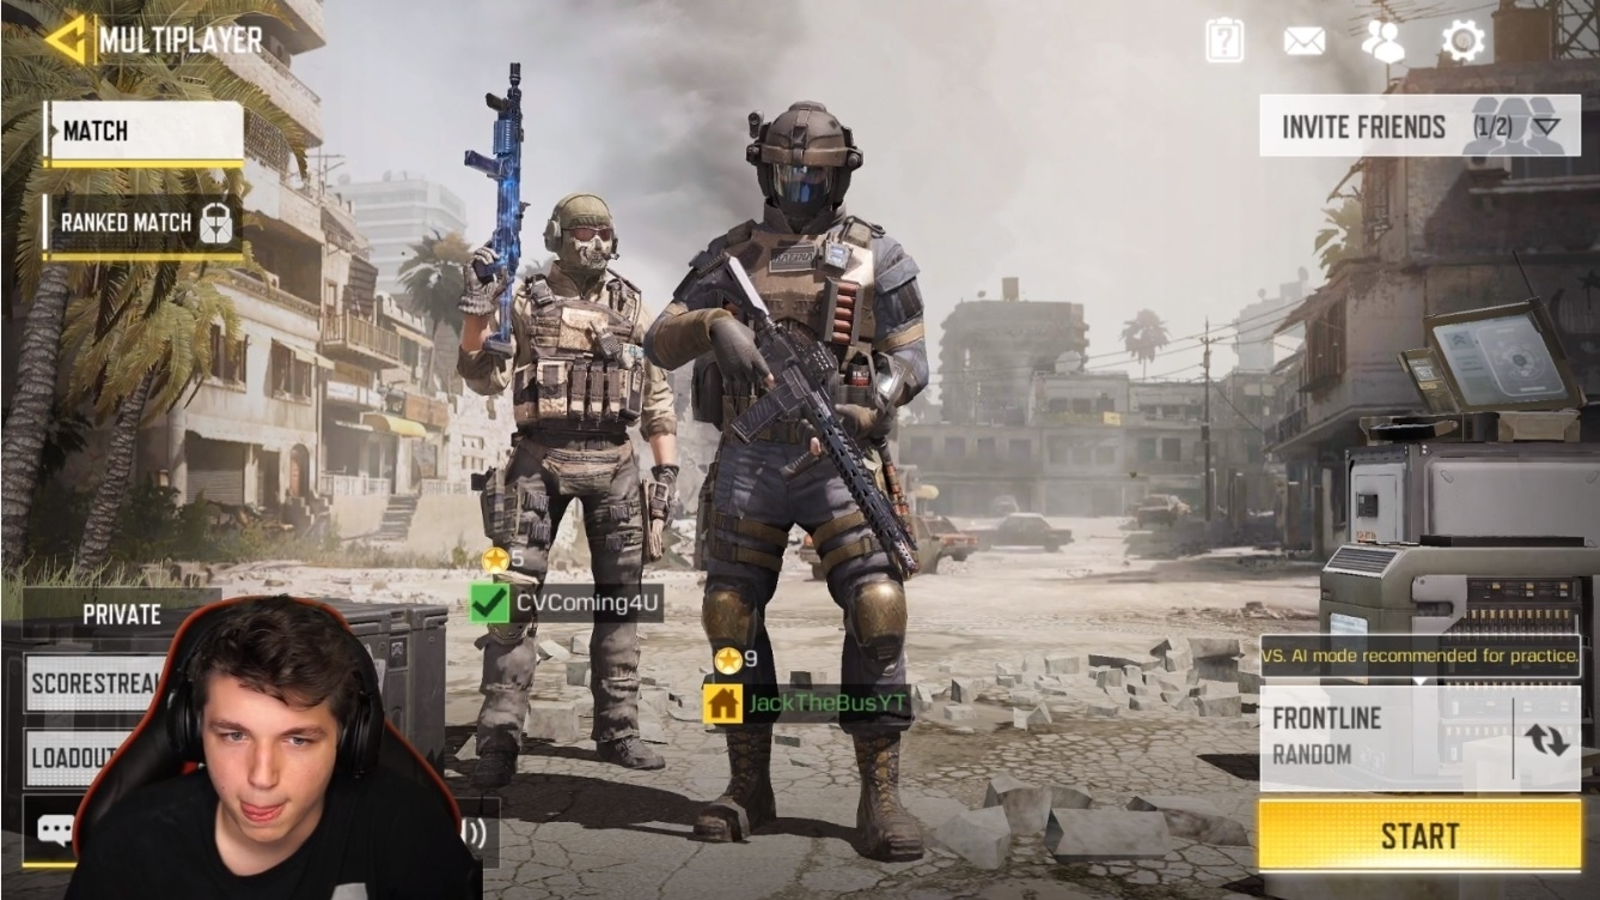 Call of Duty Mobile or PC: which is better to go with